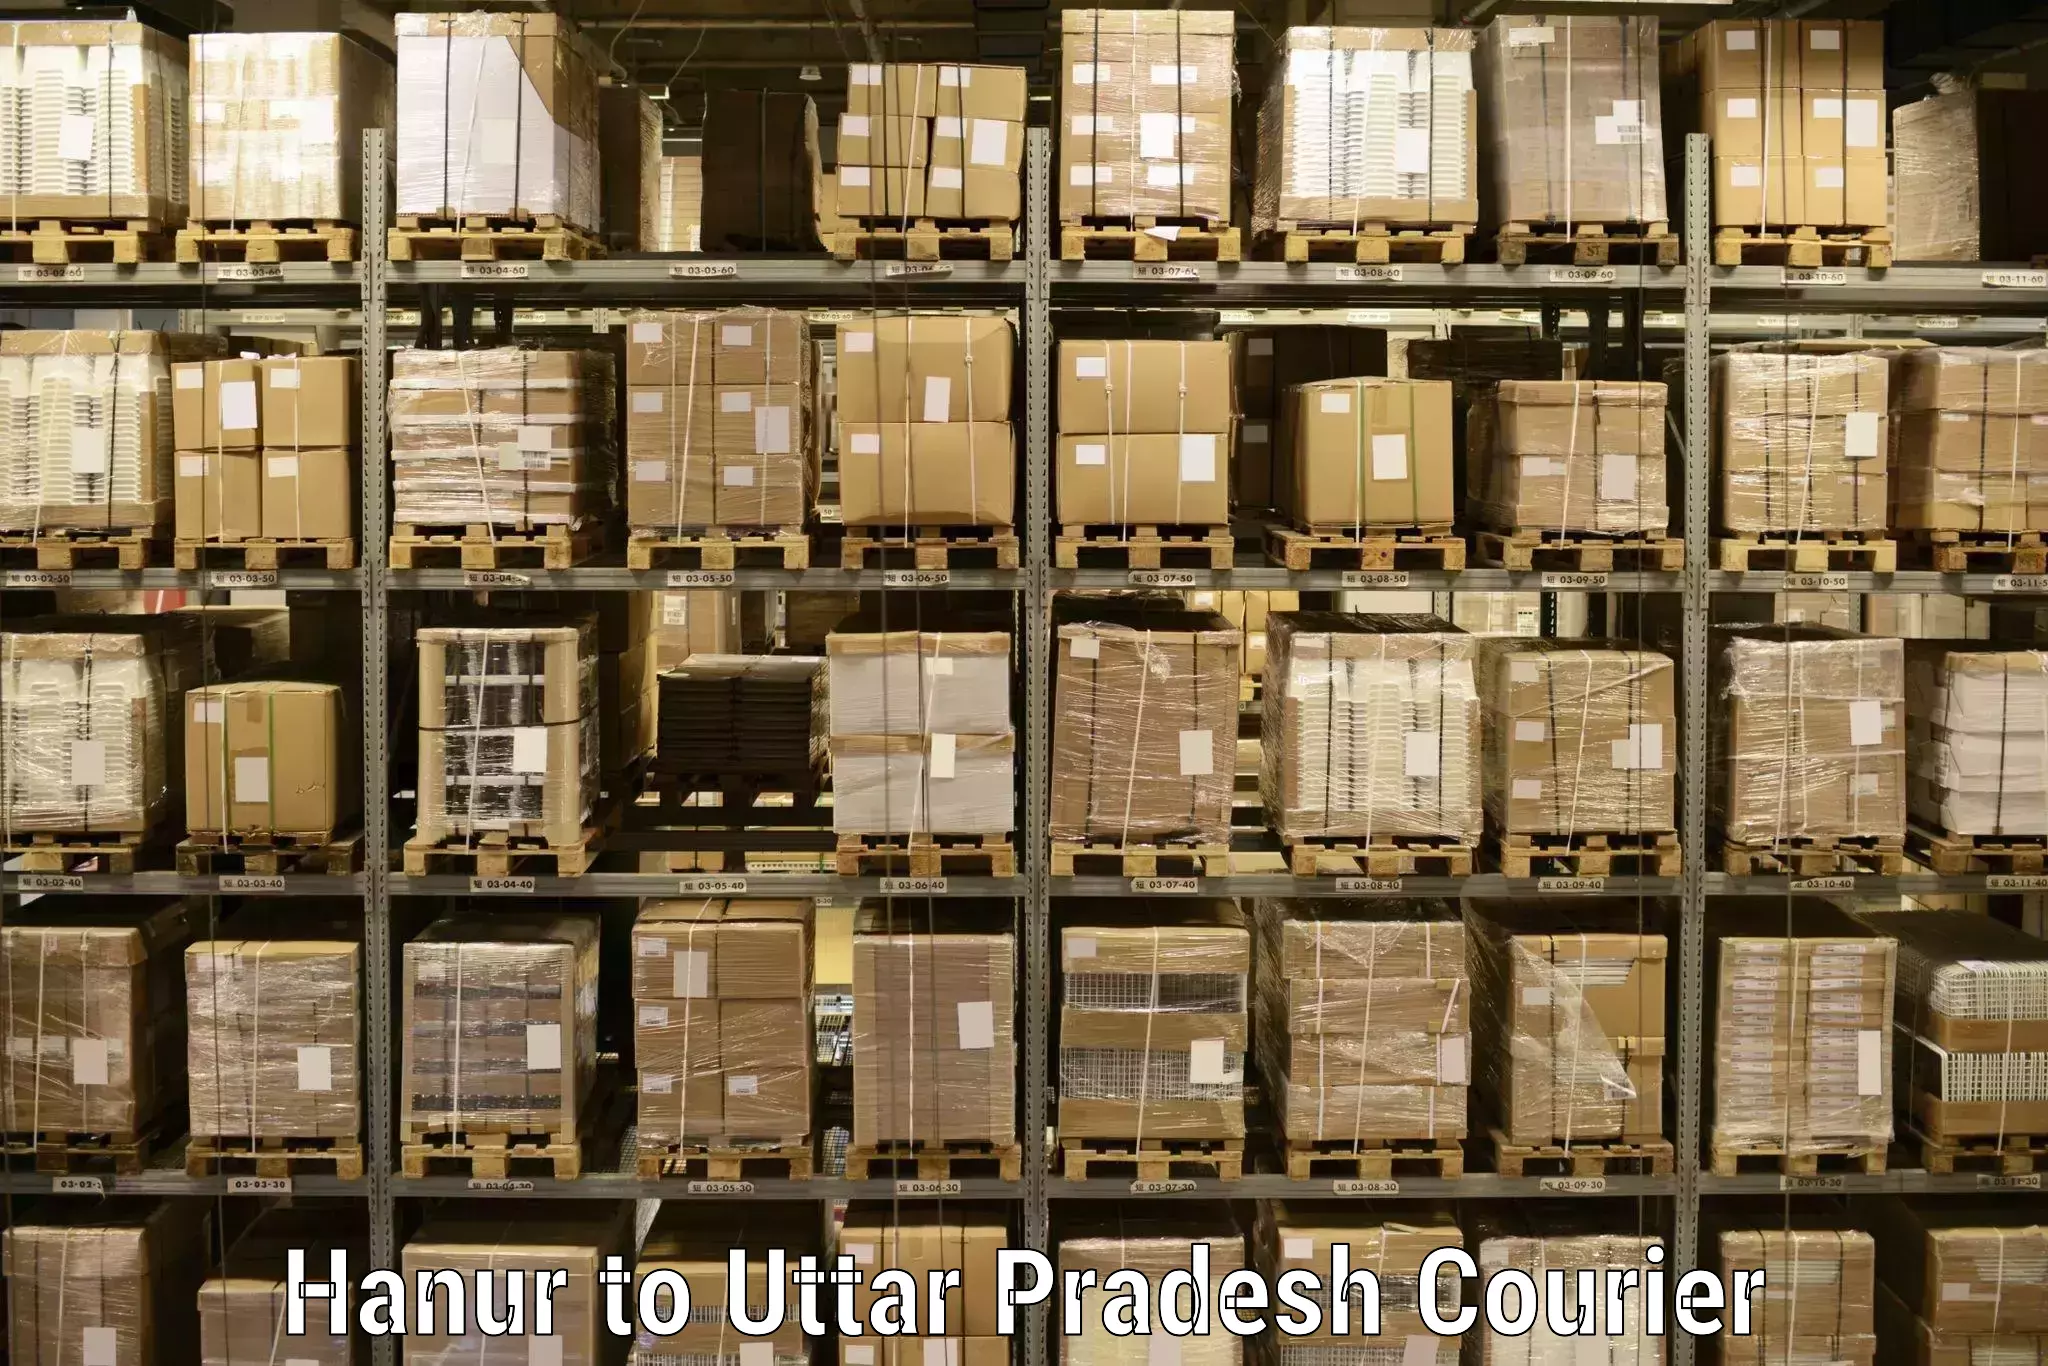 Customized shipping options Hanur to Lucknow